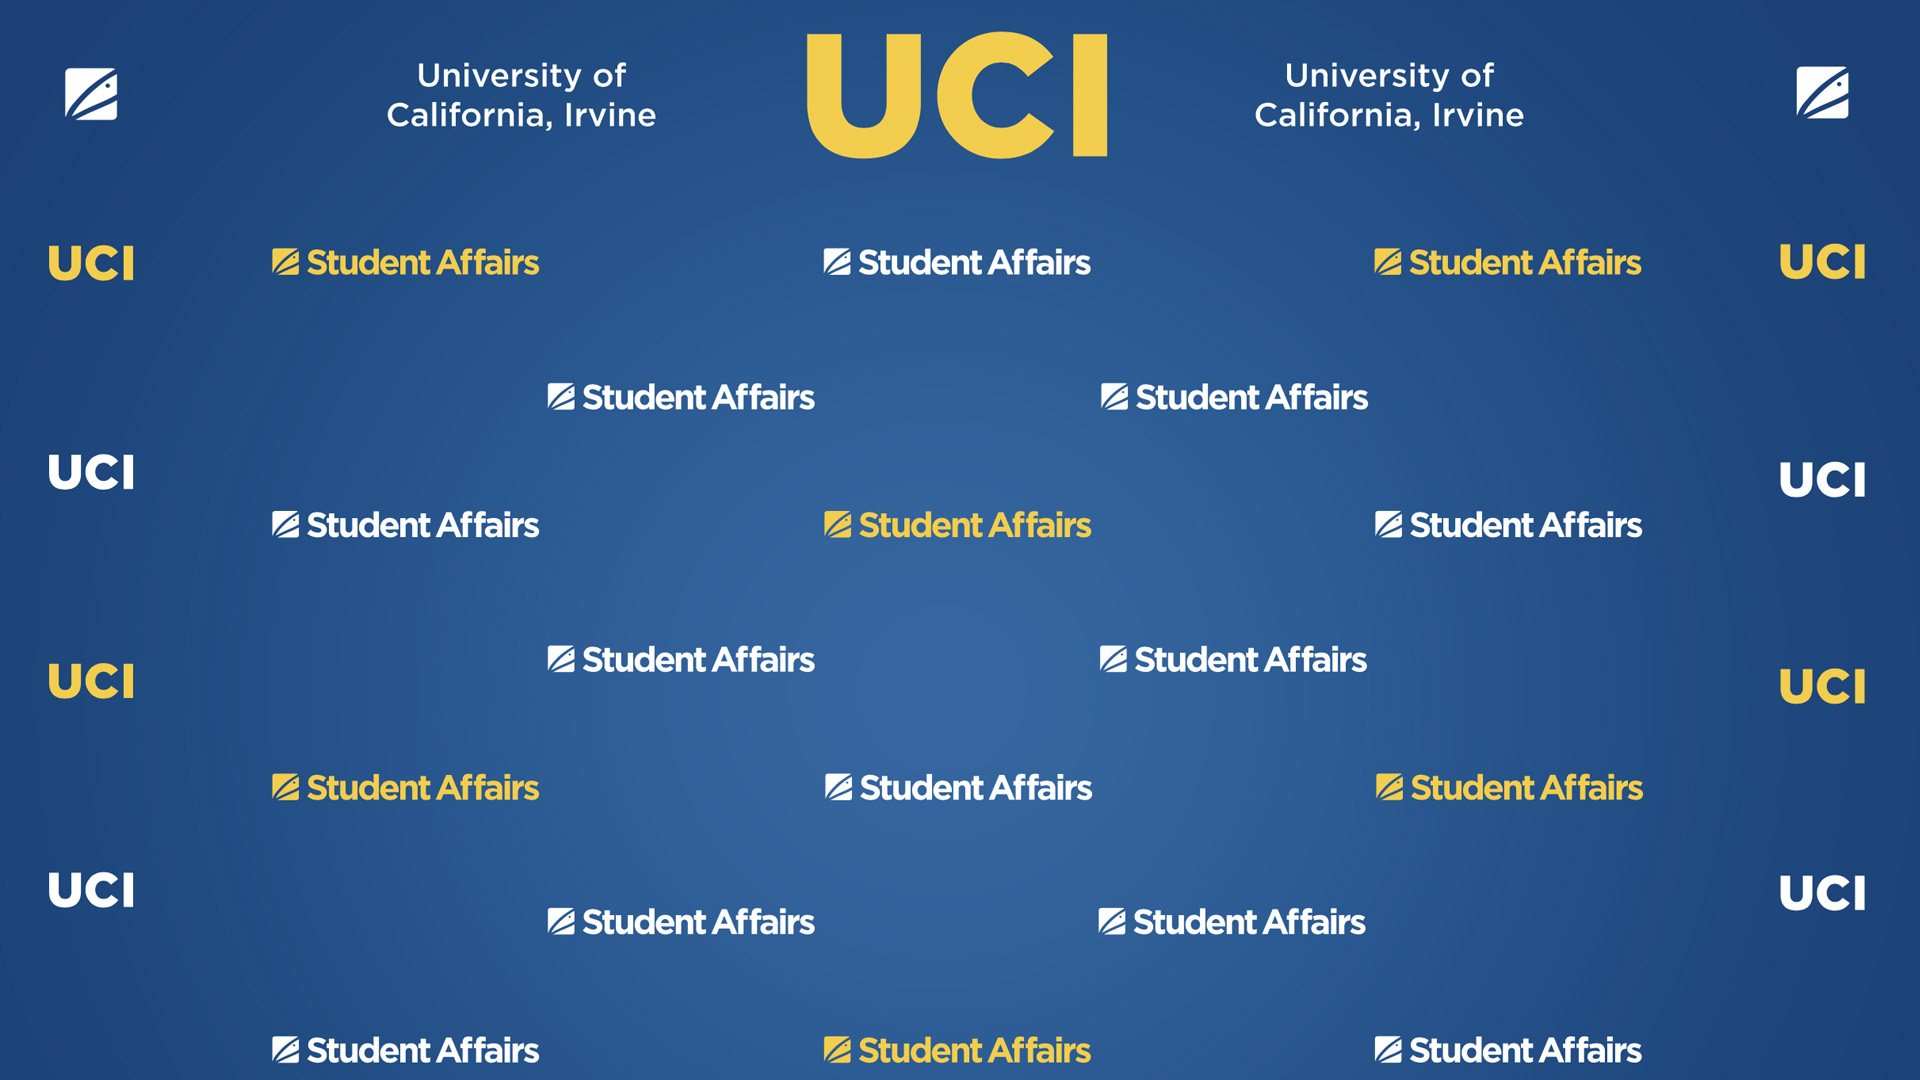 Dark blue gradient background with large yellow UCI logo at top, flanked by white University of California, Irvine logos and multiple yellow and white Student Affairs graphics in a repeating pattern below